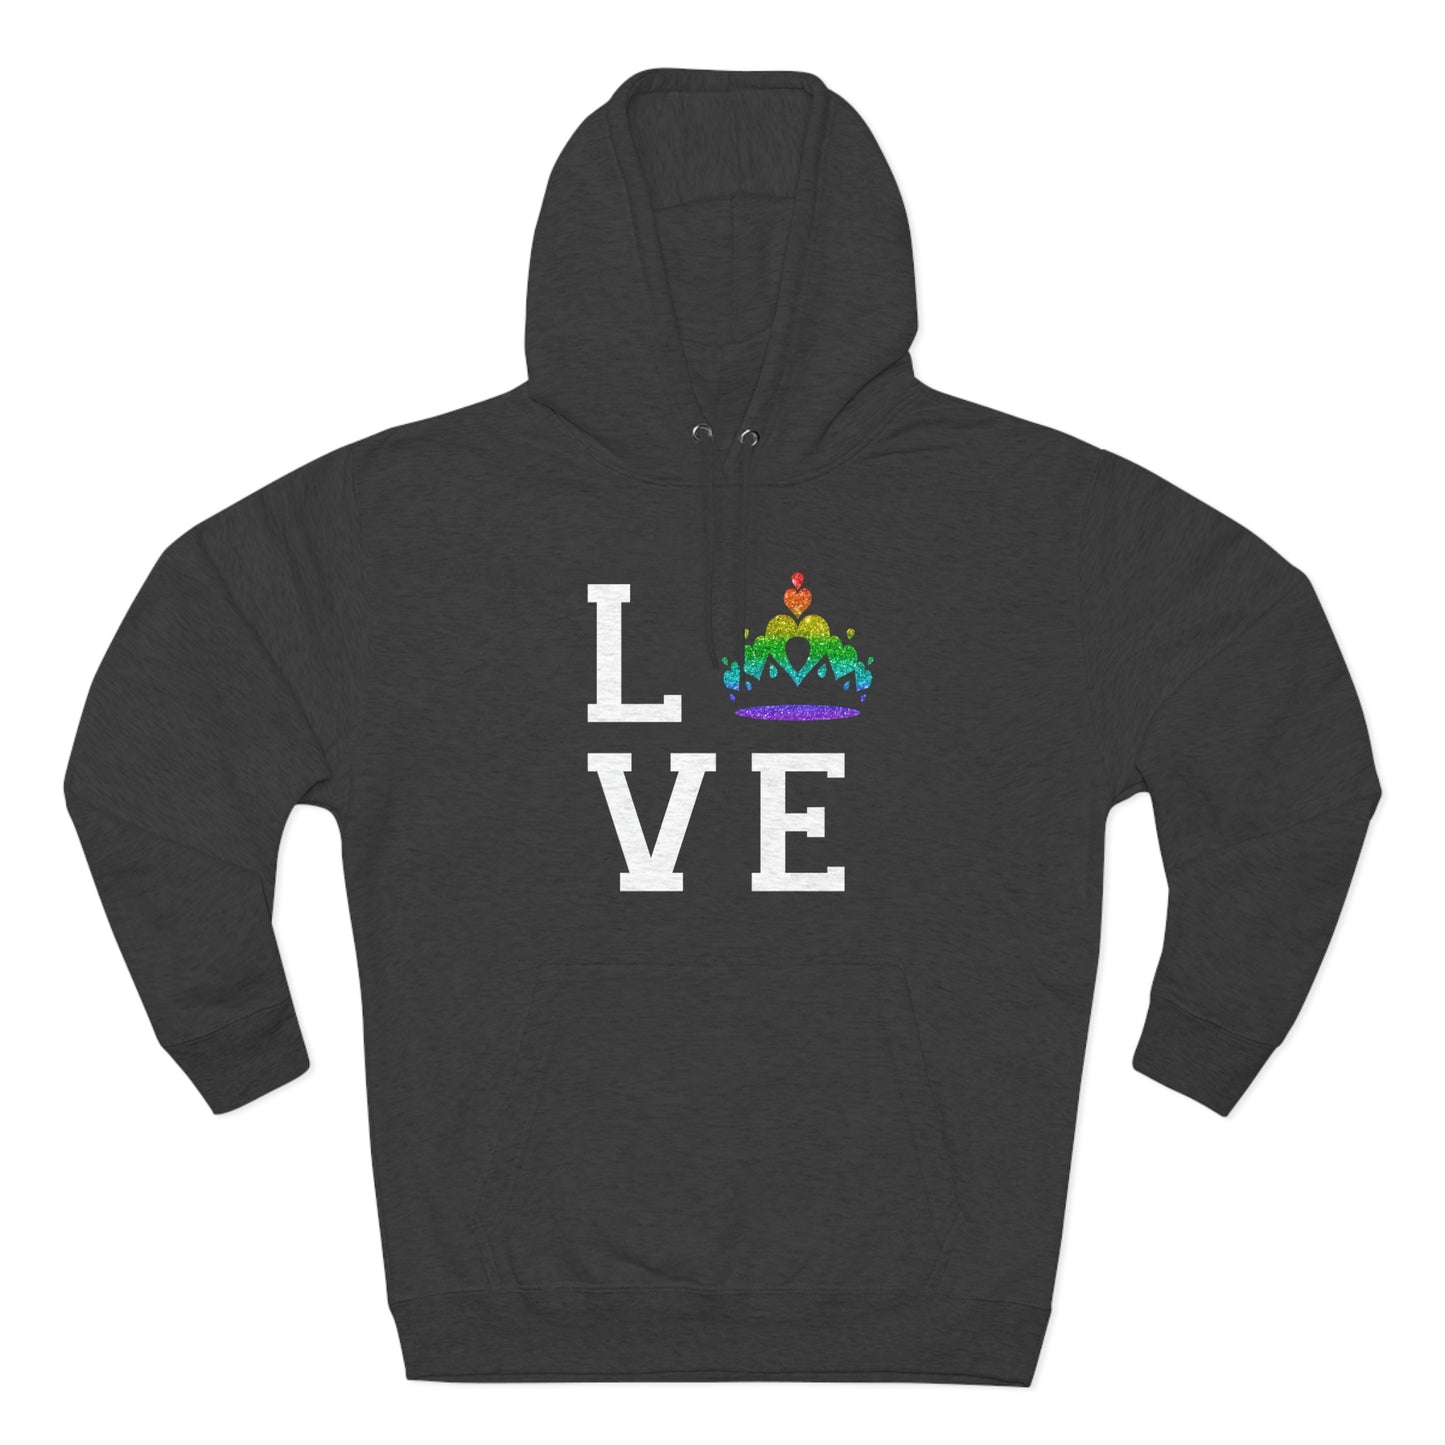 Queens for Love - Unisex Pullover Hoodie